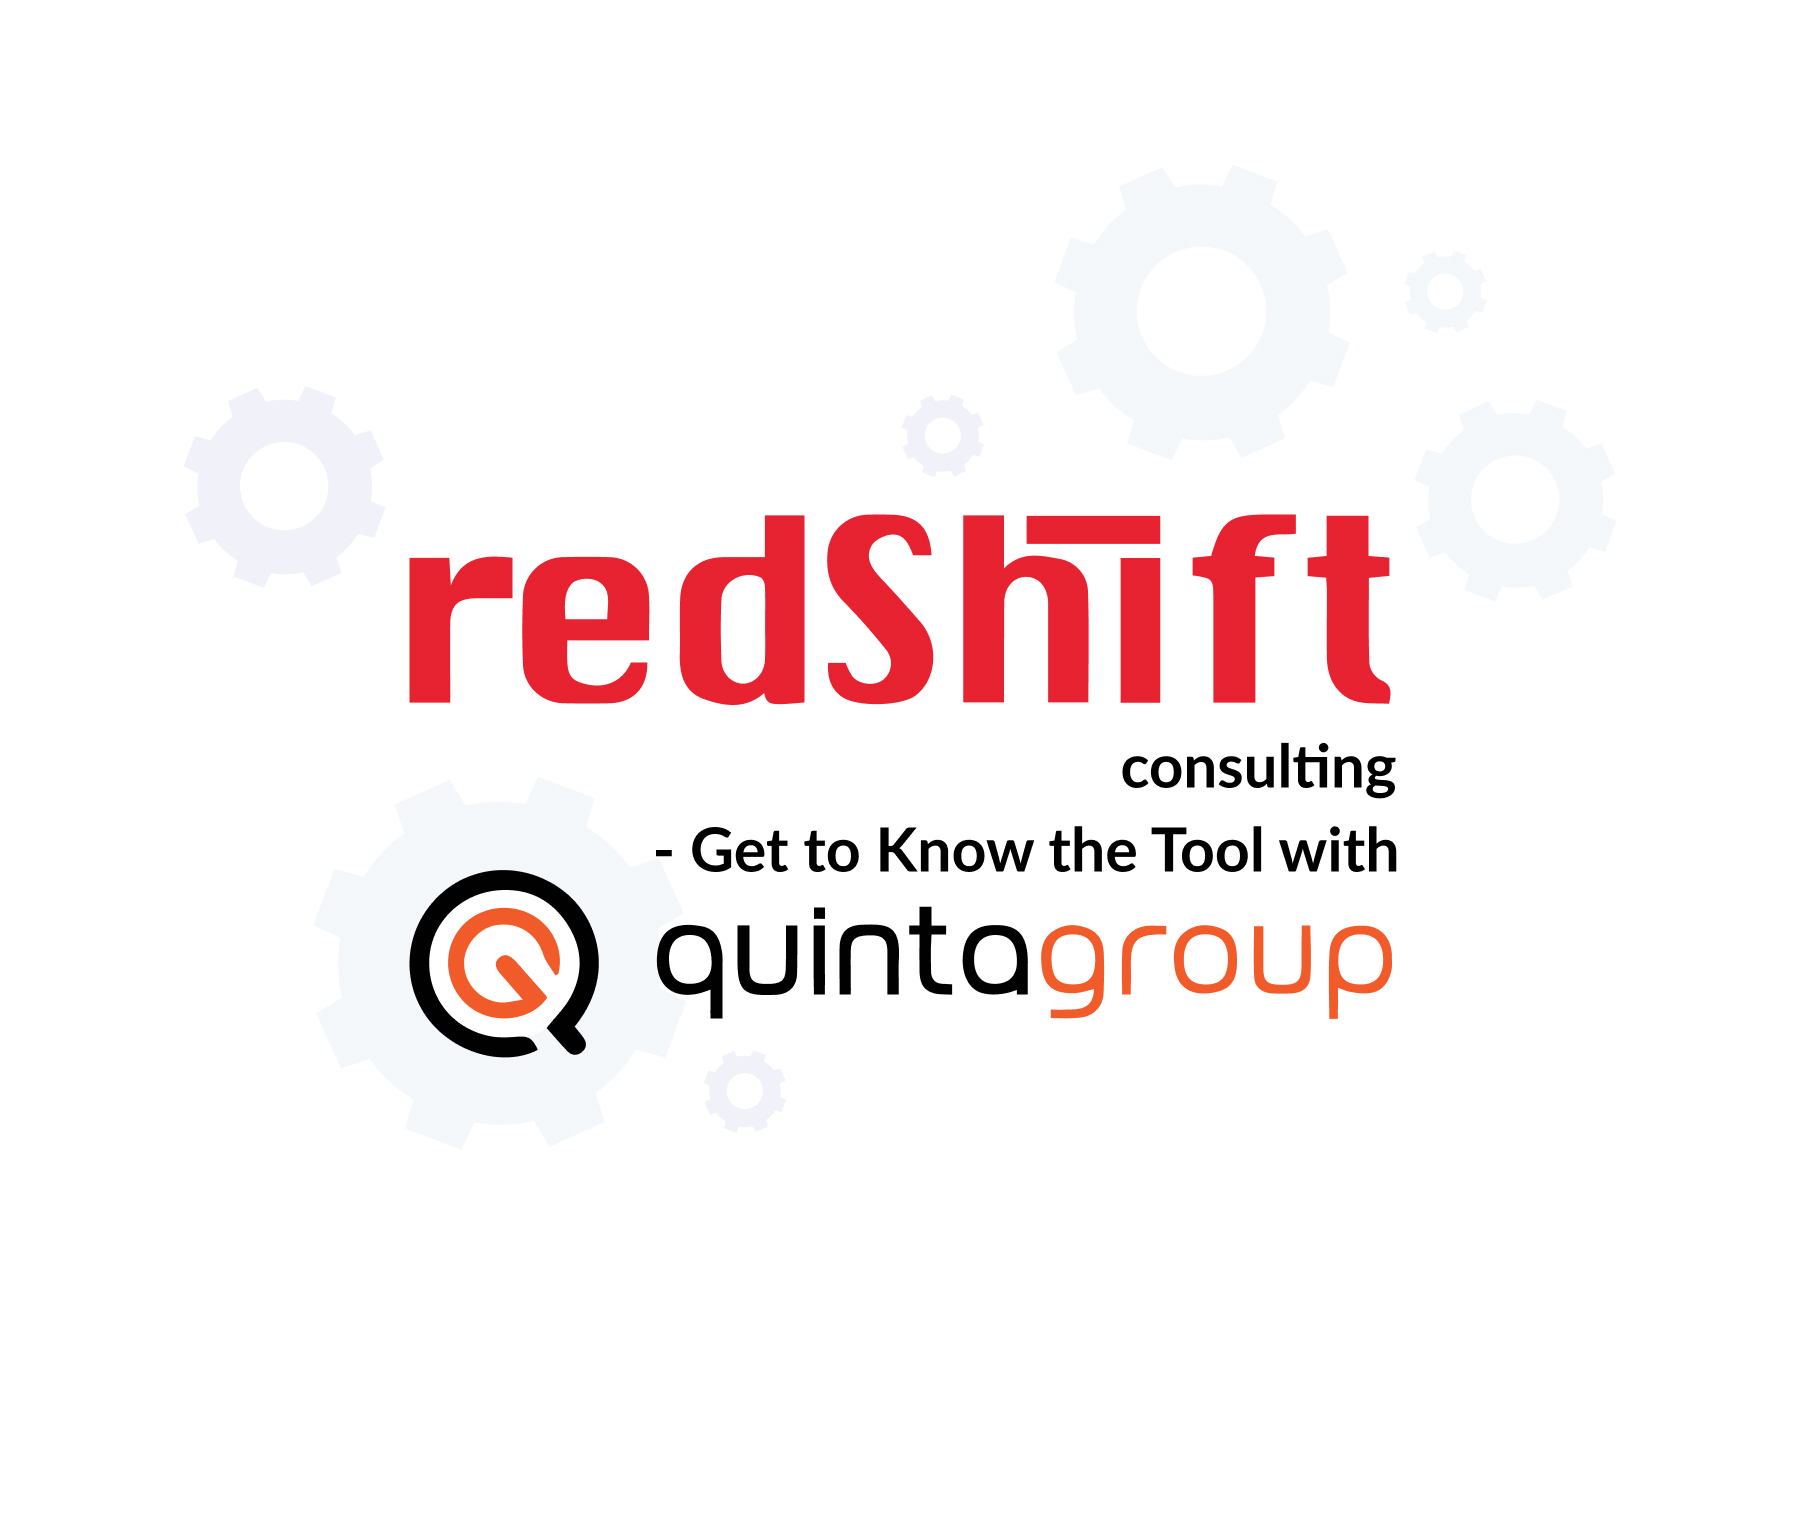 redshift consulting with Quintagroup